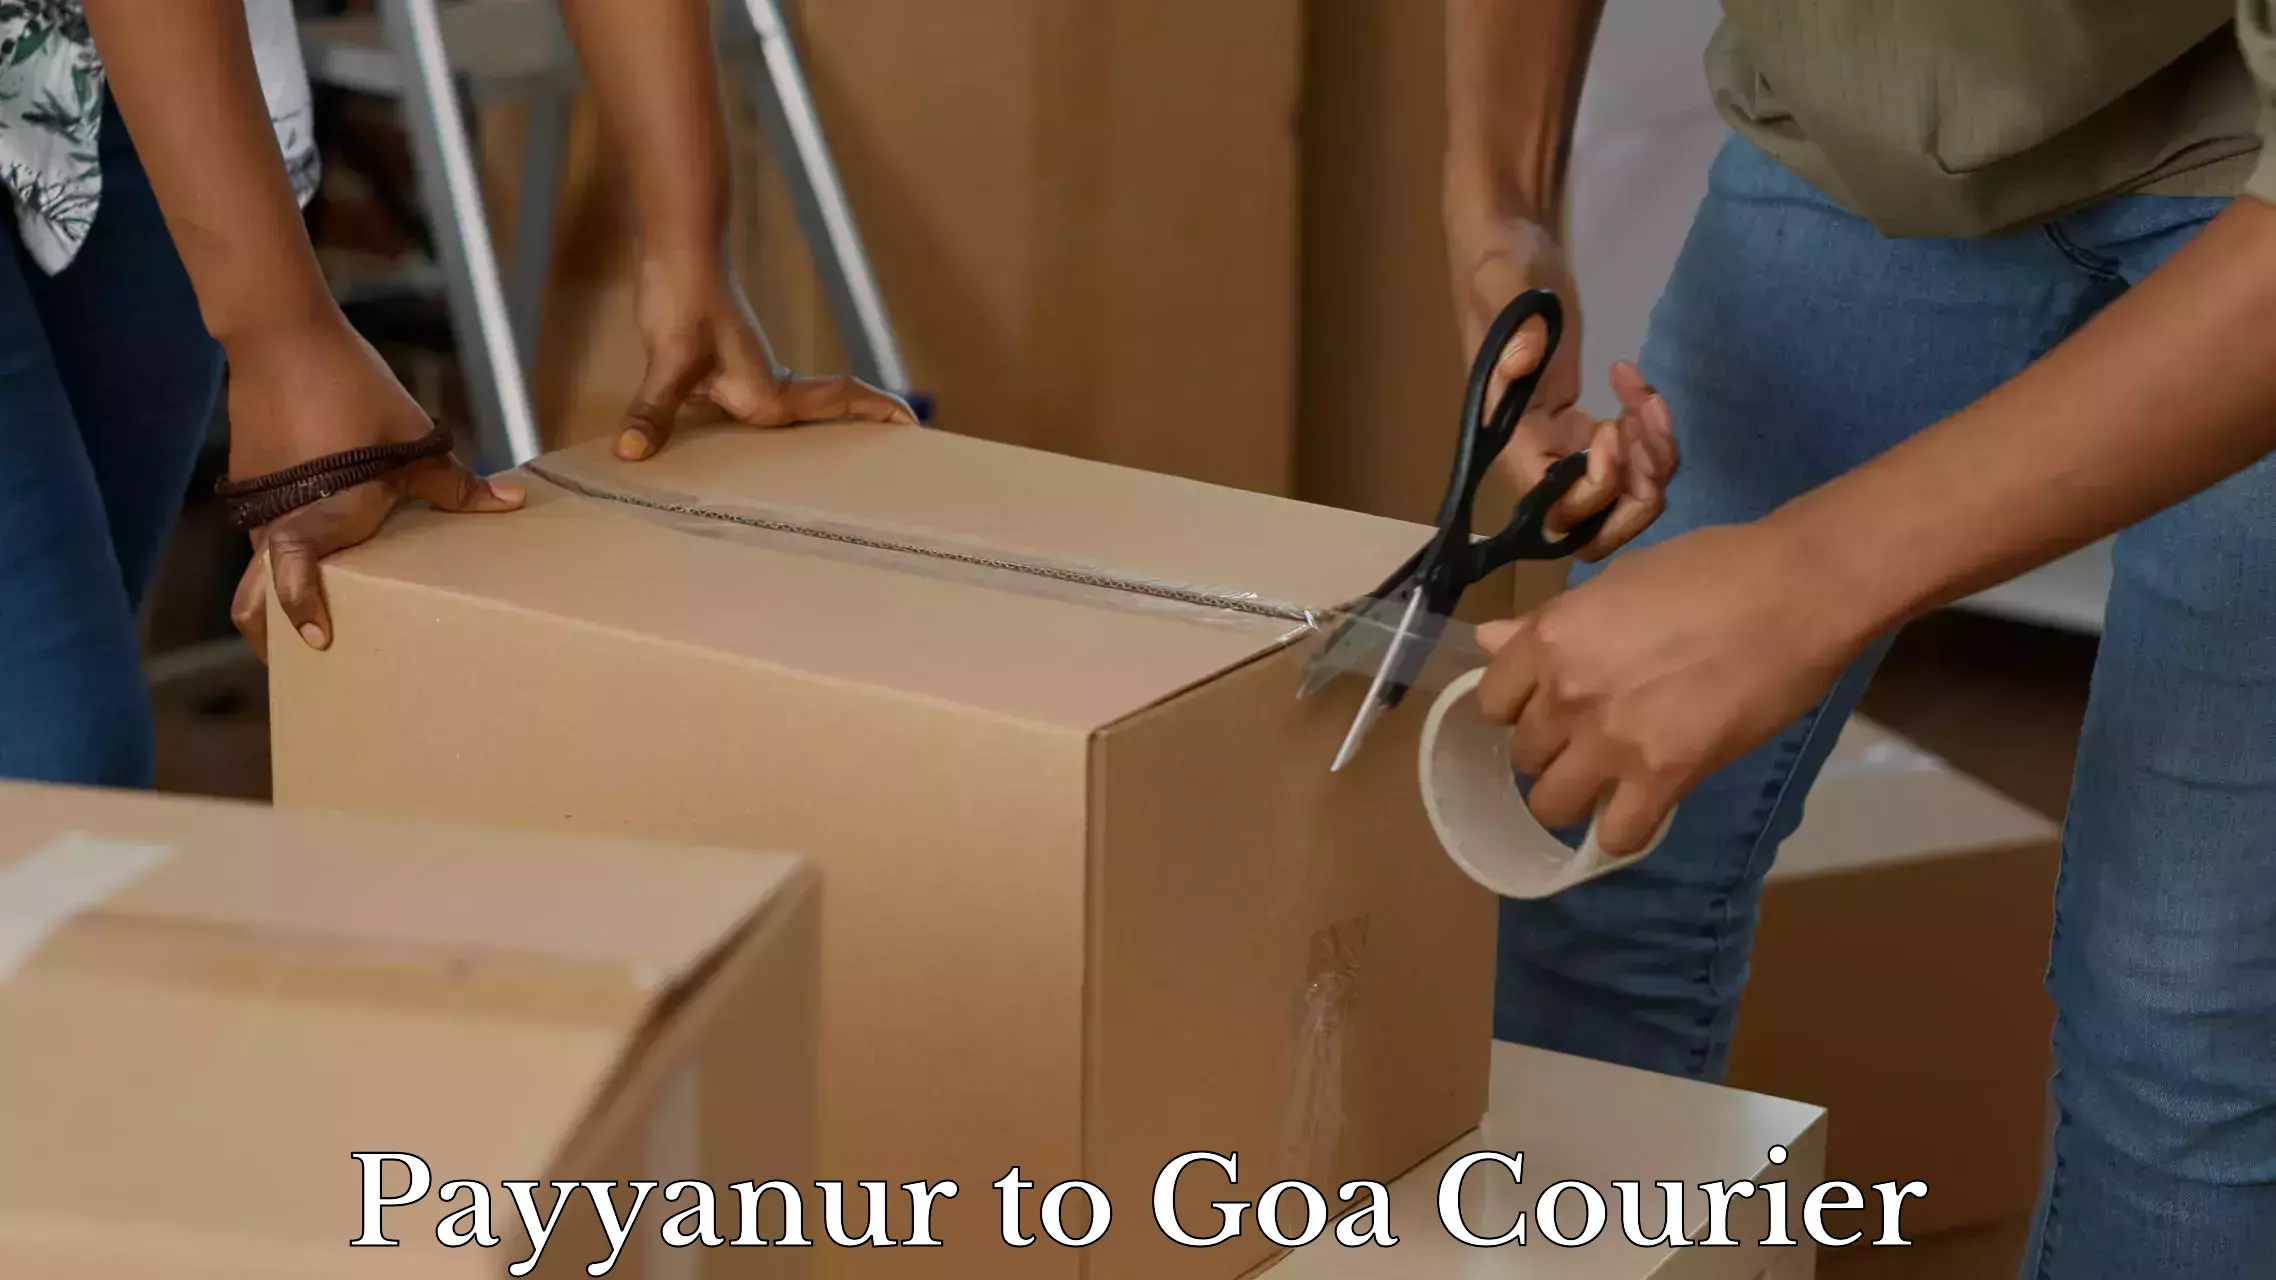 Luggage transport deals Payyanur to Goa